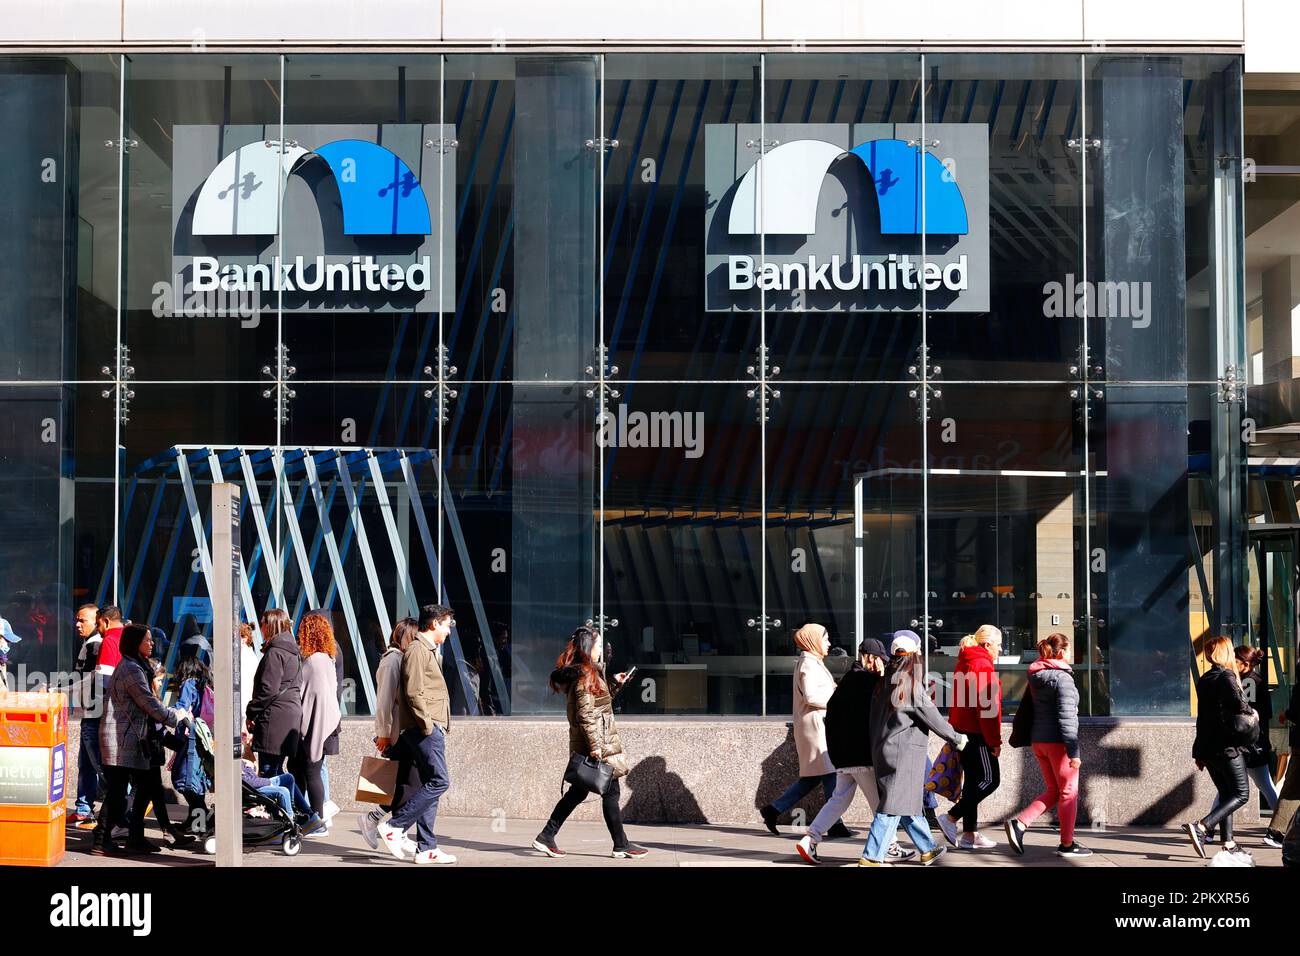 People walk past a BankUnited bank branch, 960 6th Ave, New York in Manhattan's Herald Square. Stock Photo